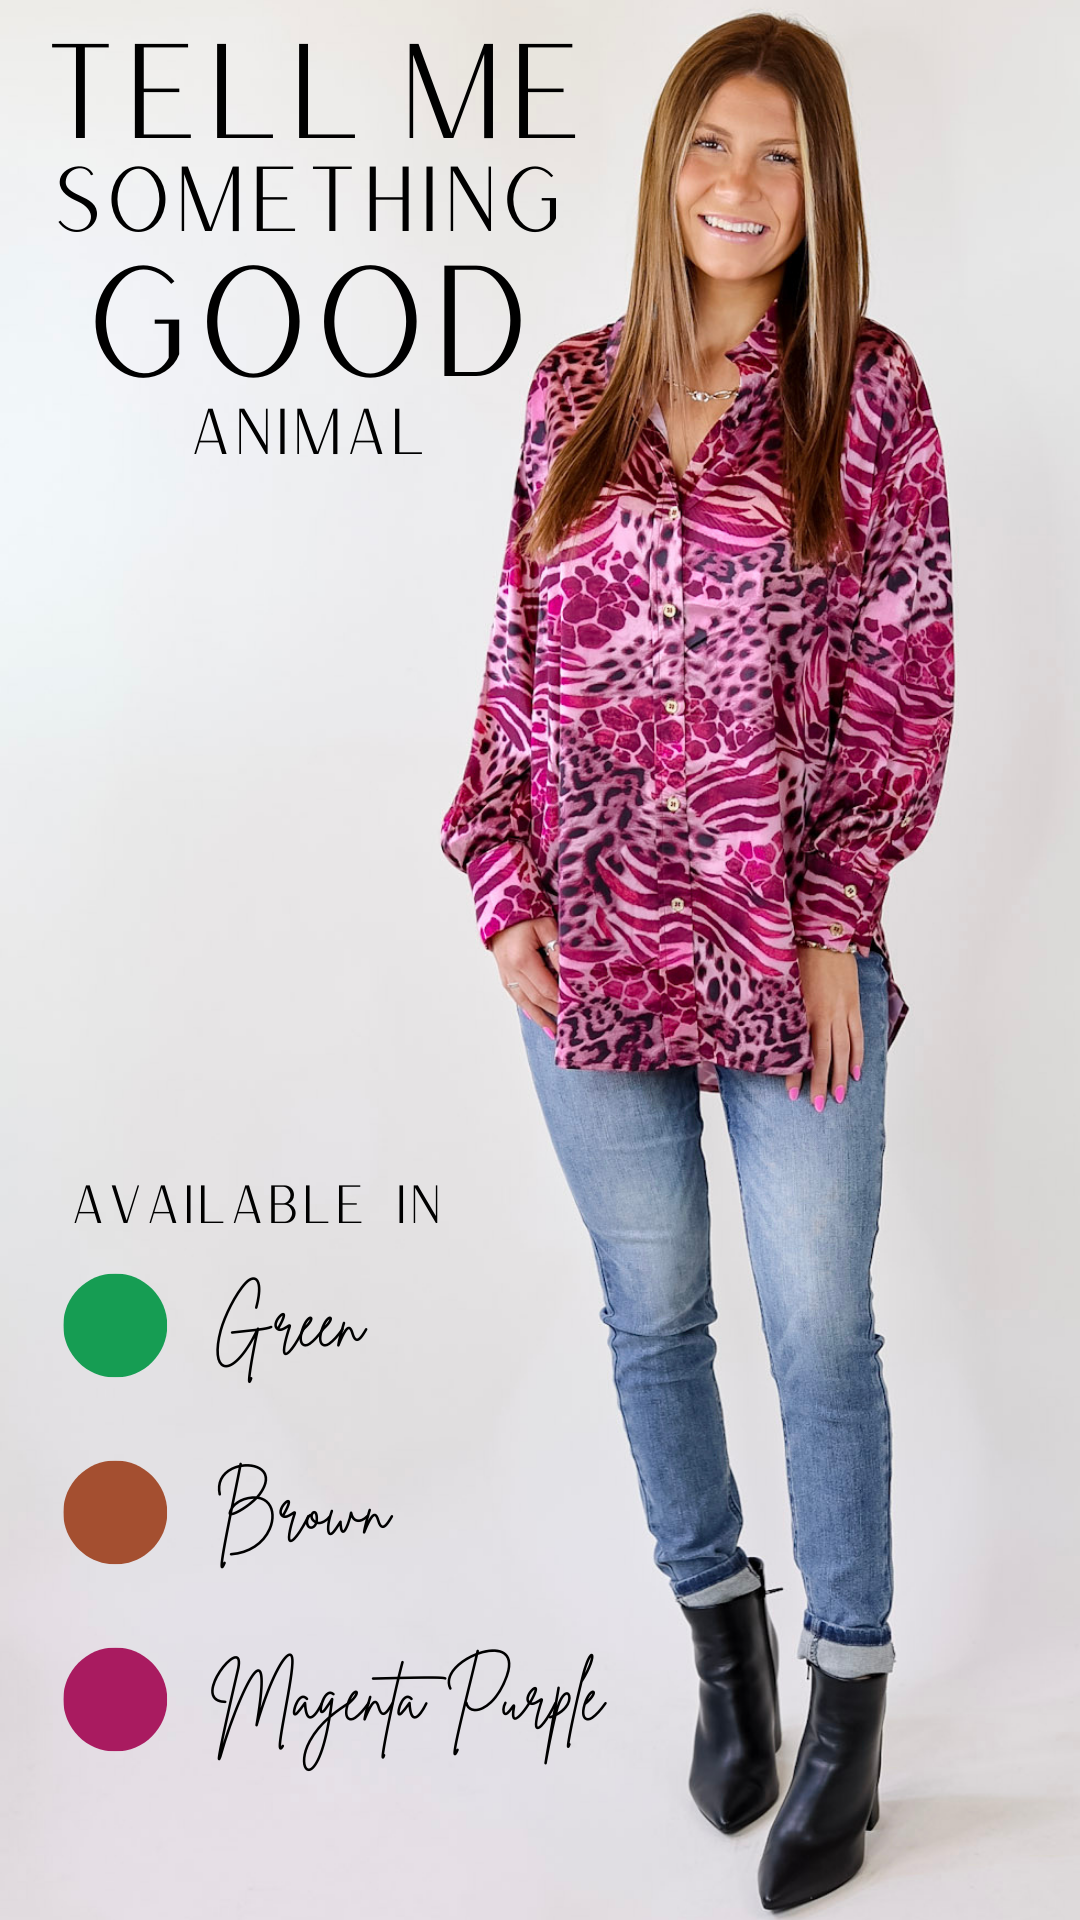 Tell Me Something Good Mixed Animal Print Long Sleeve Button Up Top in Magenta Purple - Giddy Up Glamour Boutique